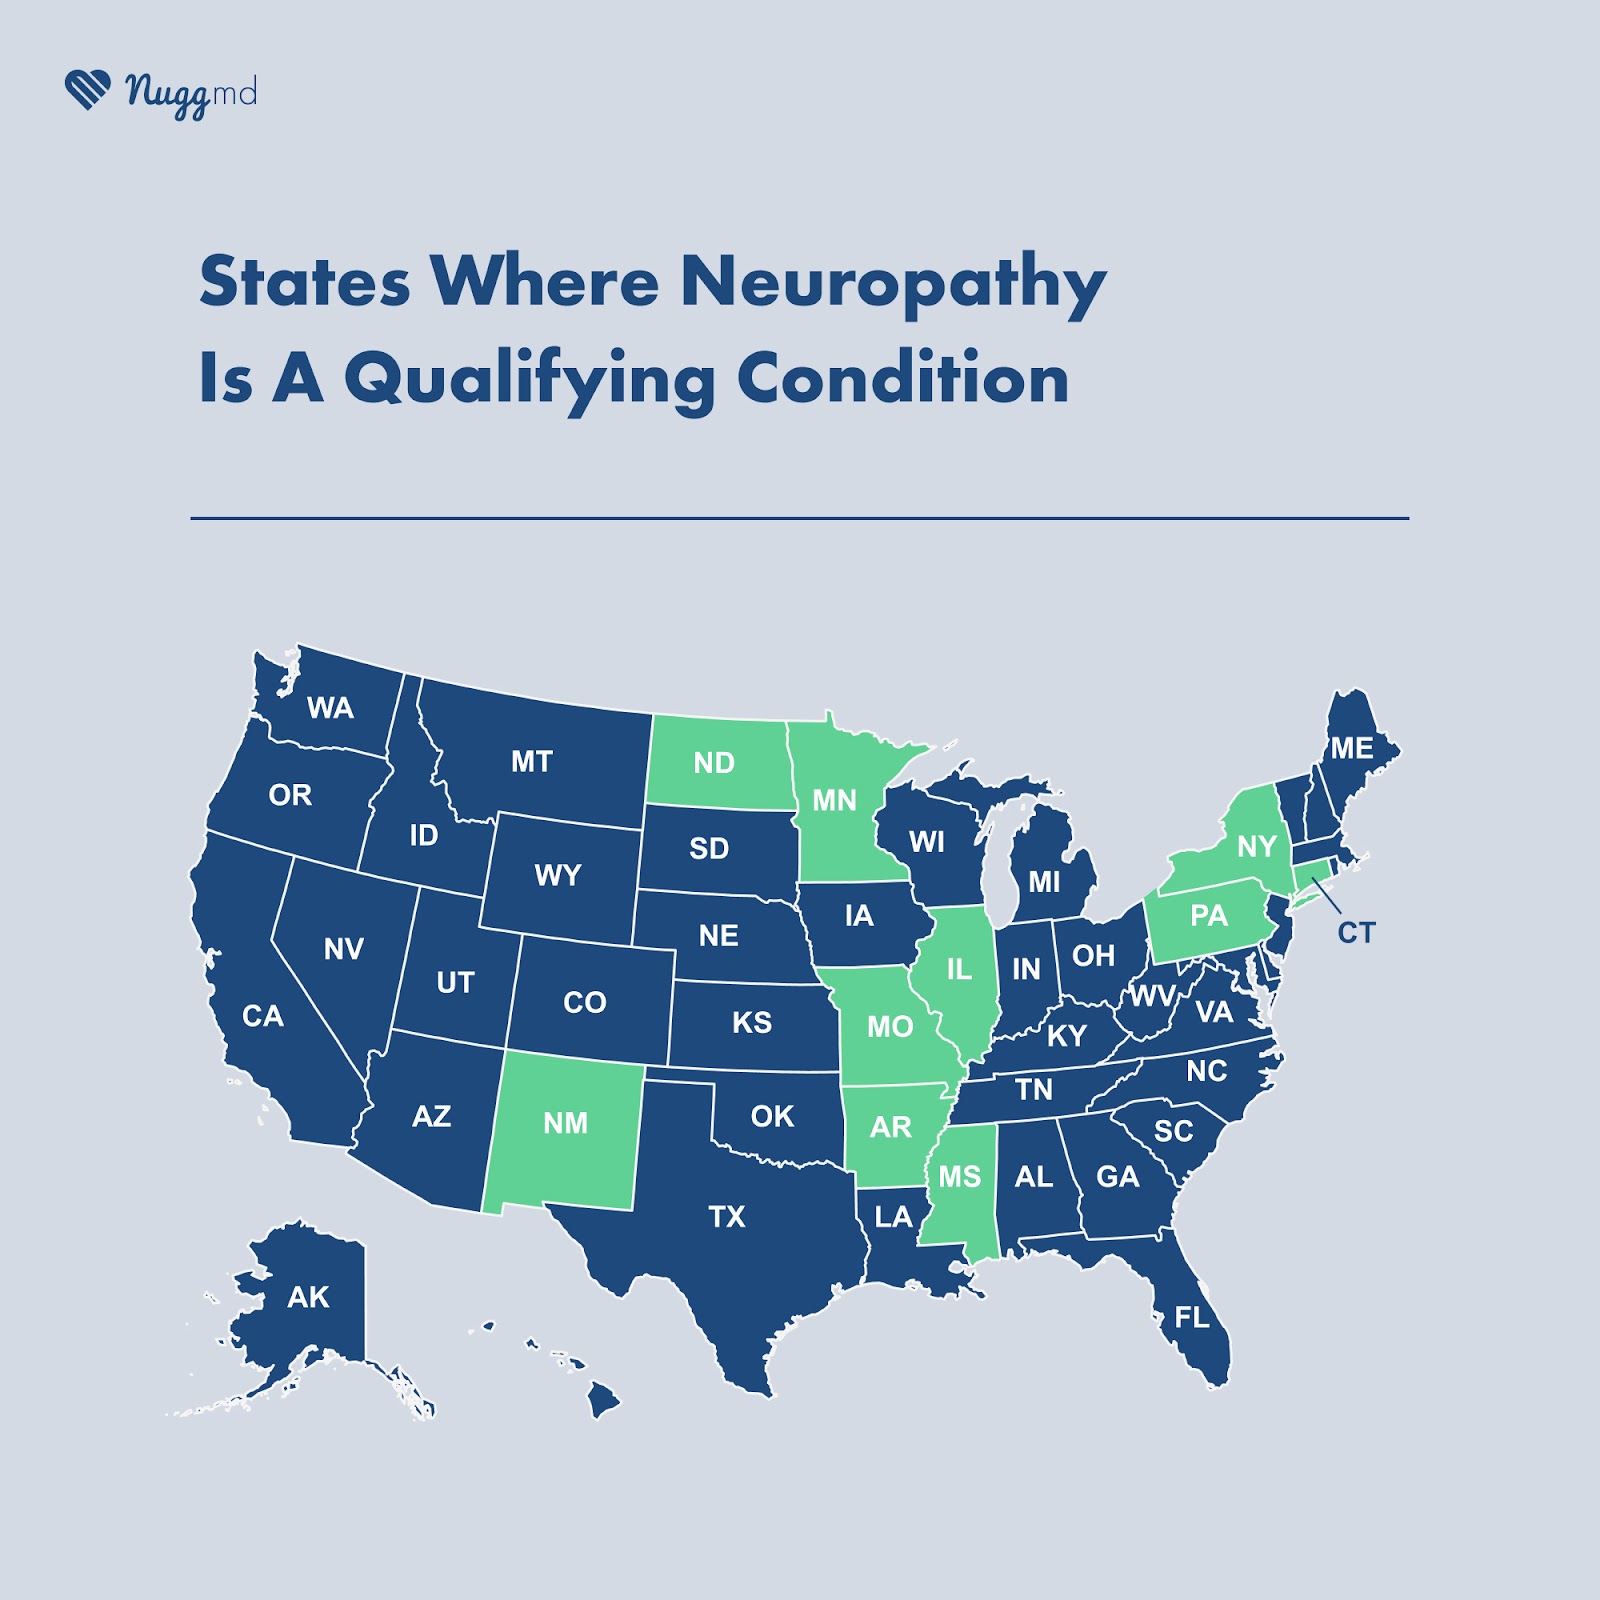 states where neuropathy is a qualifying condition